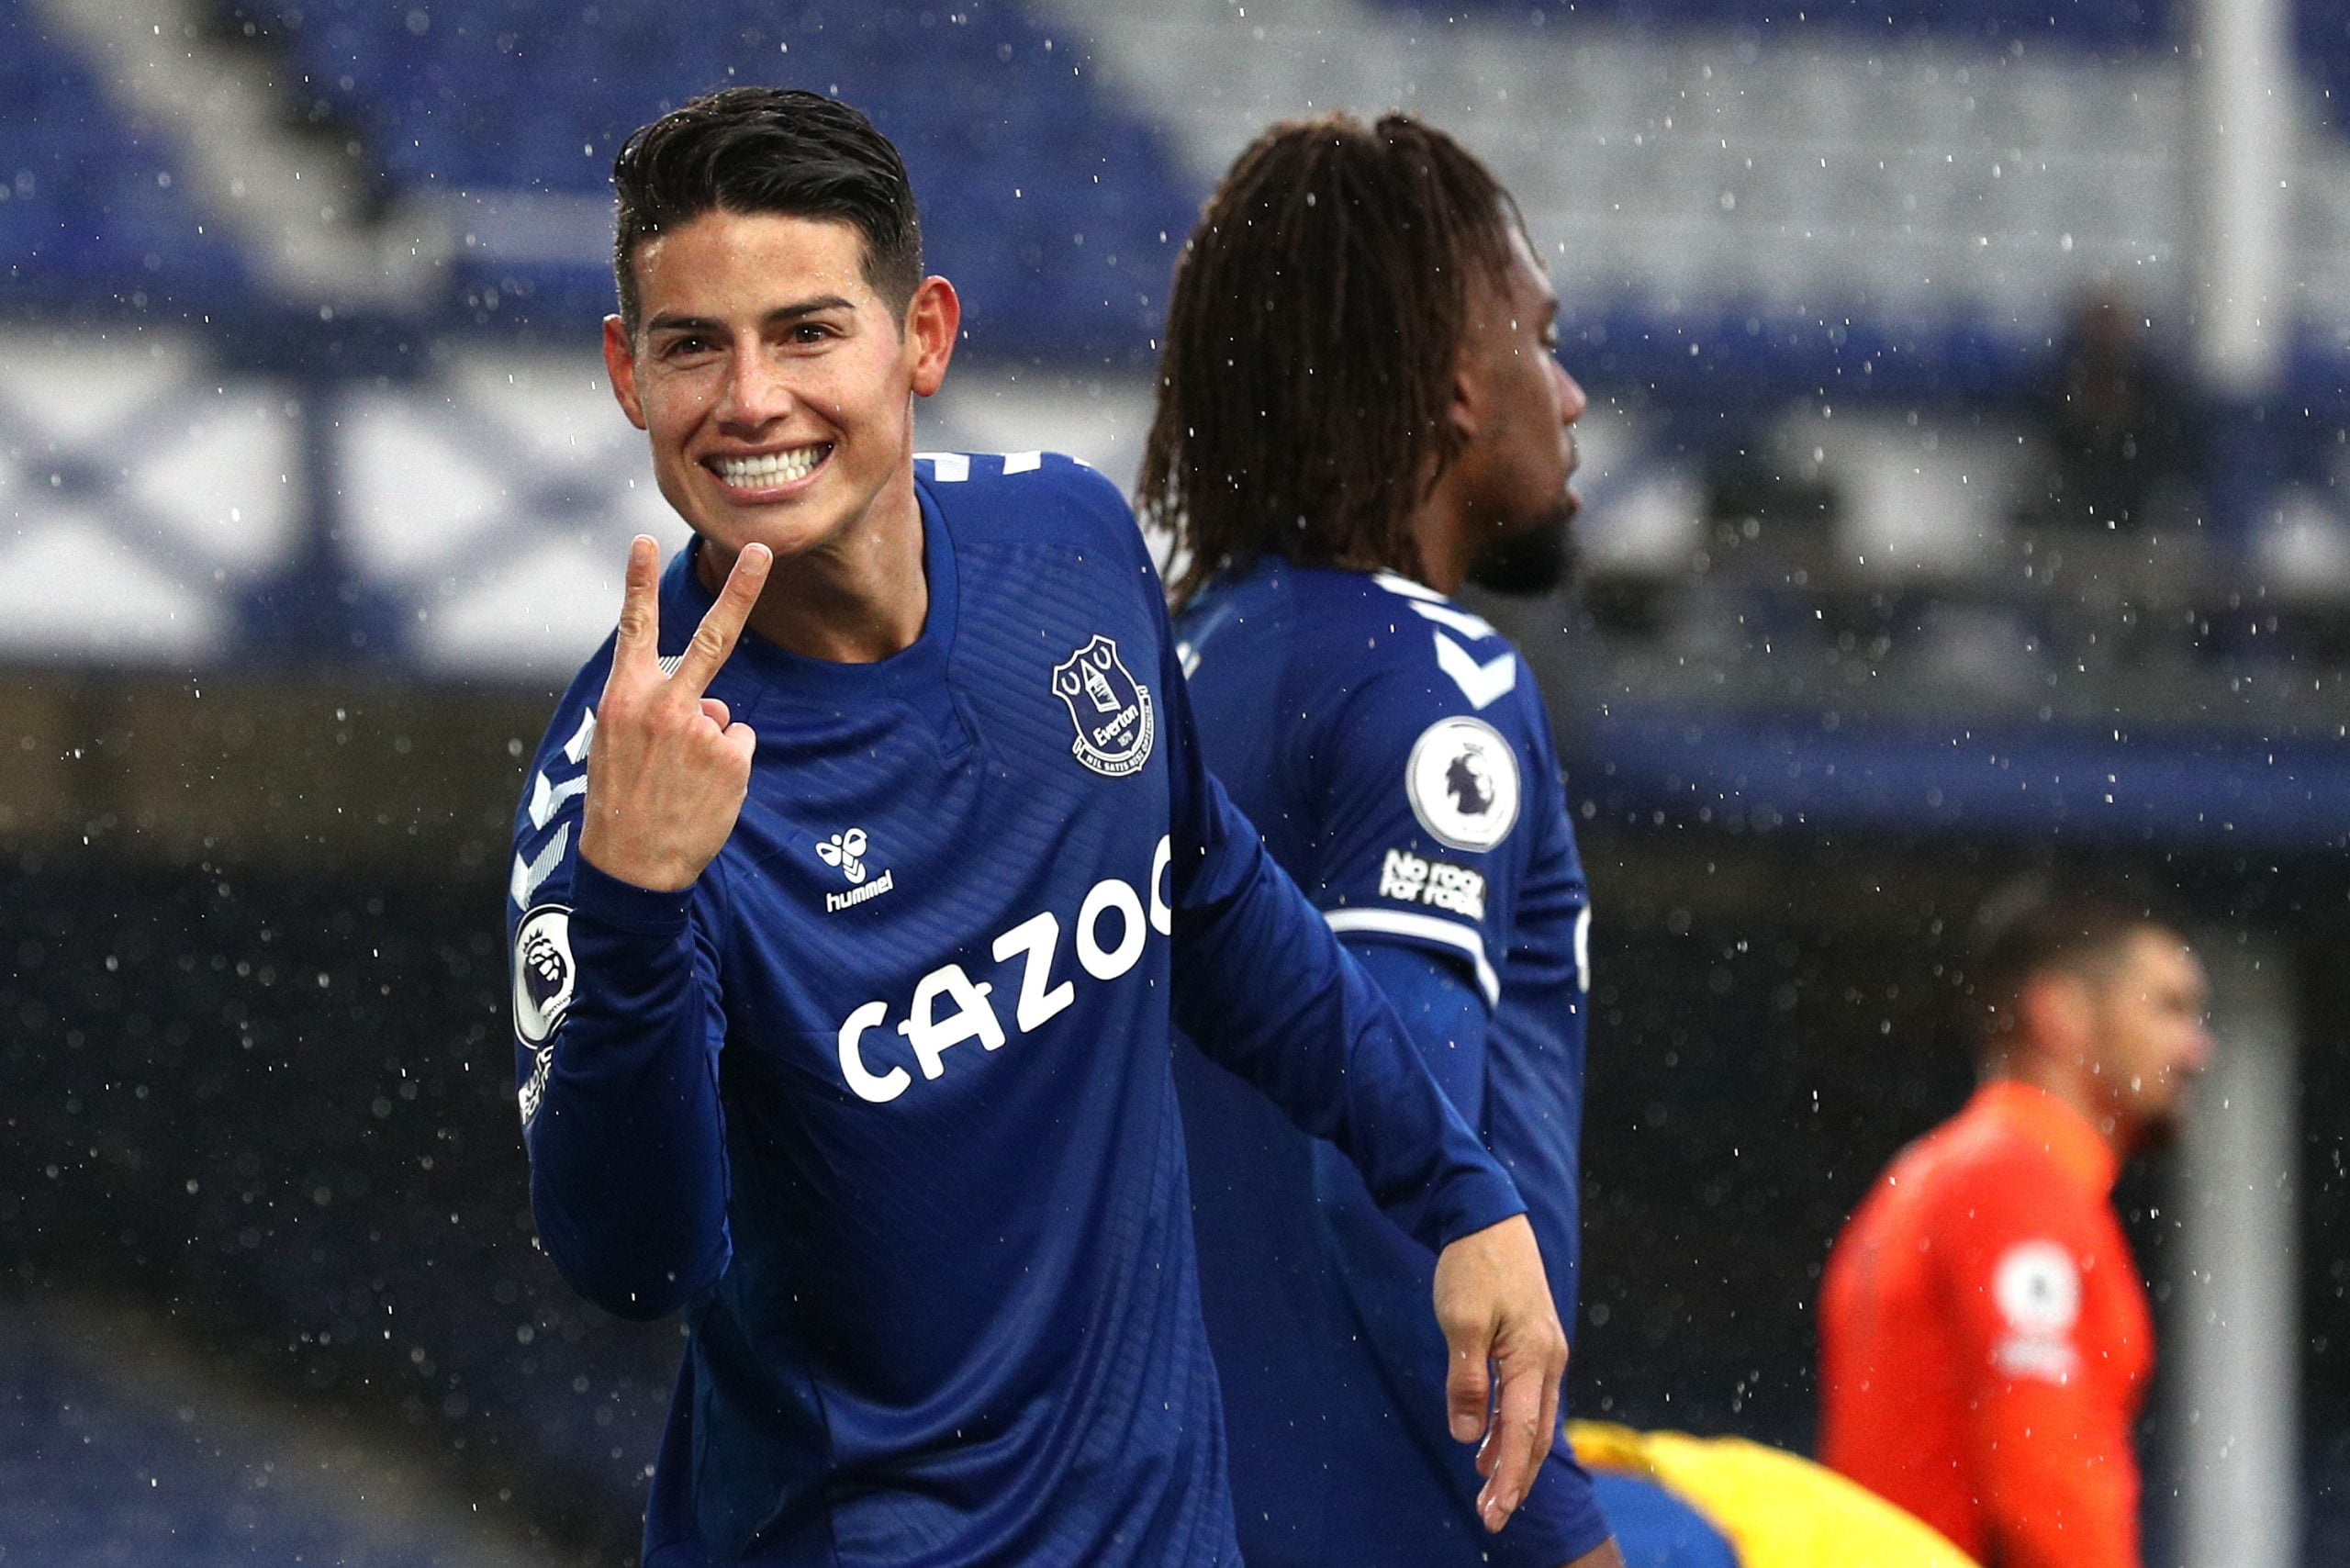 Everton sweating on the fitness of James Rodriguez who is seen in the picture